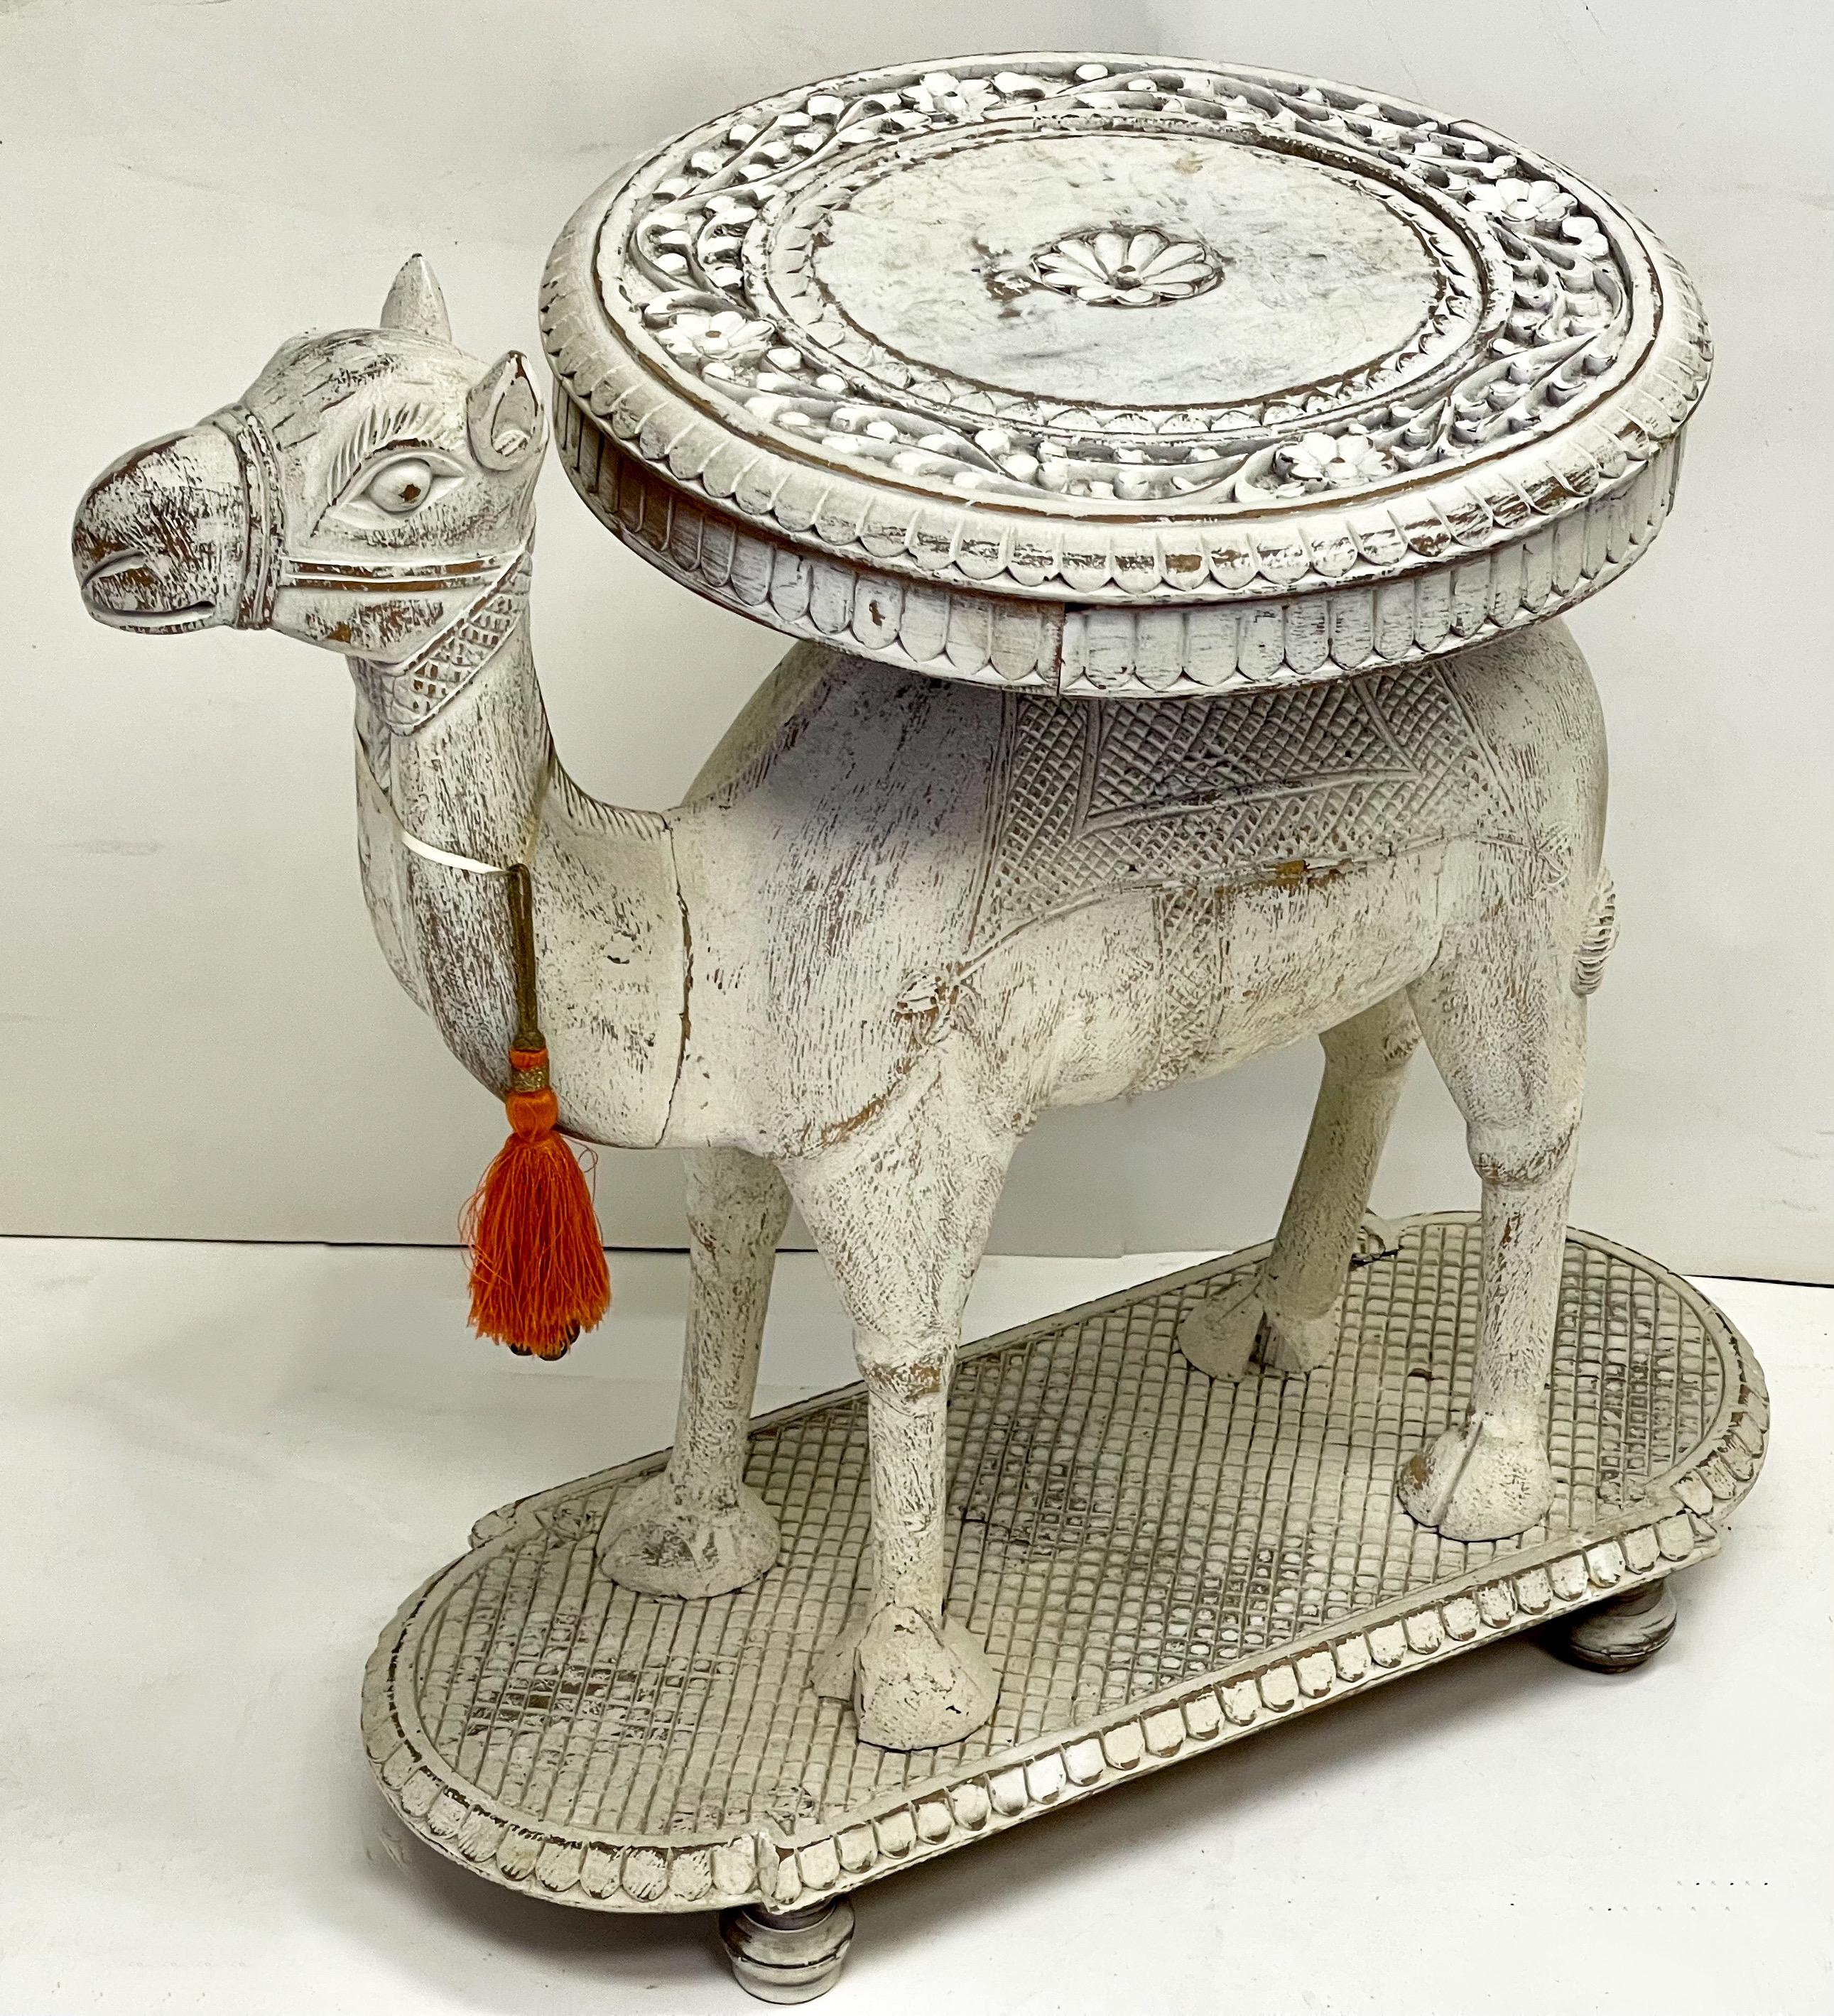 This is a mid-century Anglo- Indian carved white washed camel form side table. He is most likely made of teak, but the vintage white washed finish does make proper wood identification challenging.